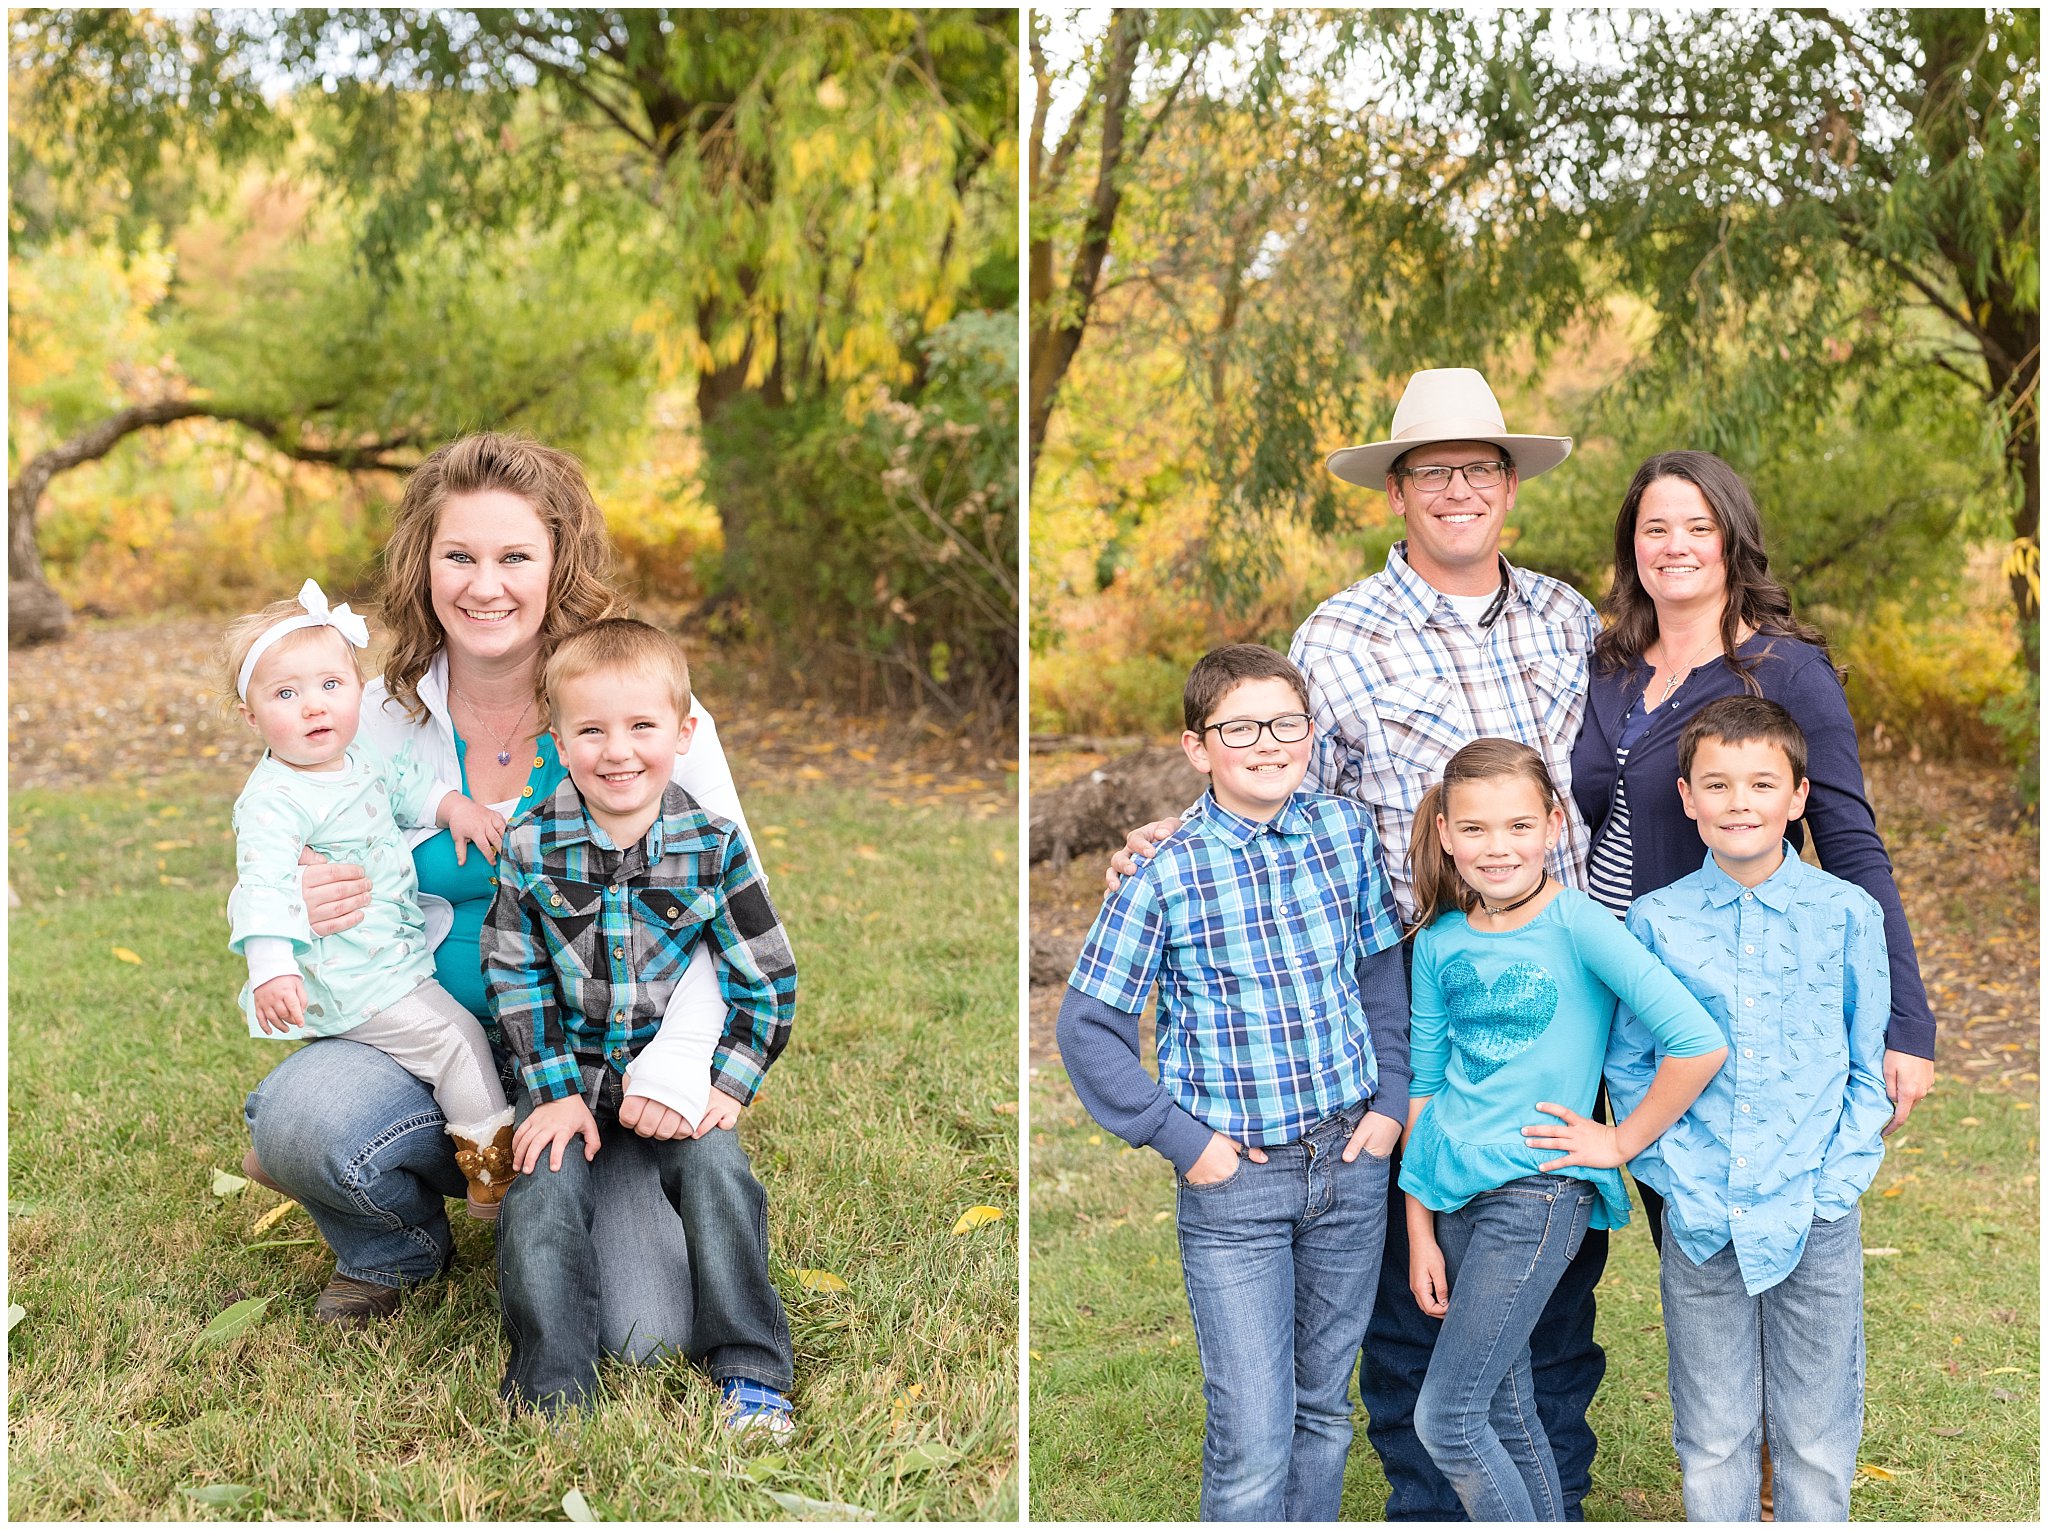 Young families looking and laughing at the camera | Tremonton Family Pictures and Make a Wish Event | Jessie and Dallin Photography